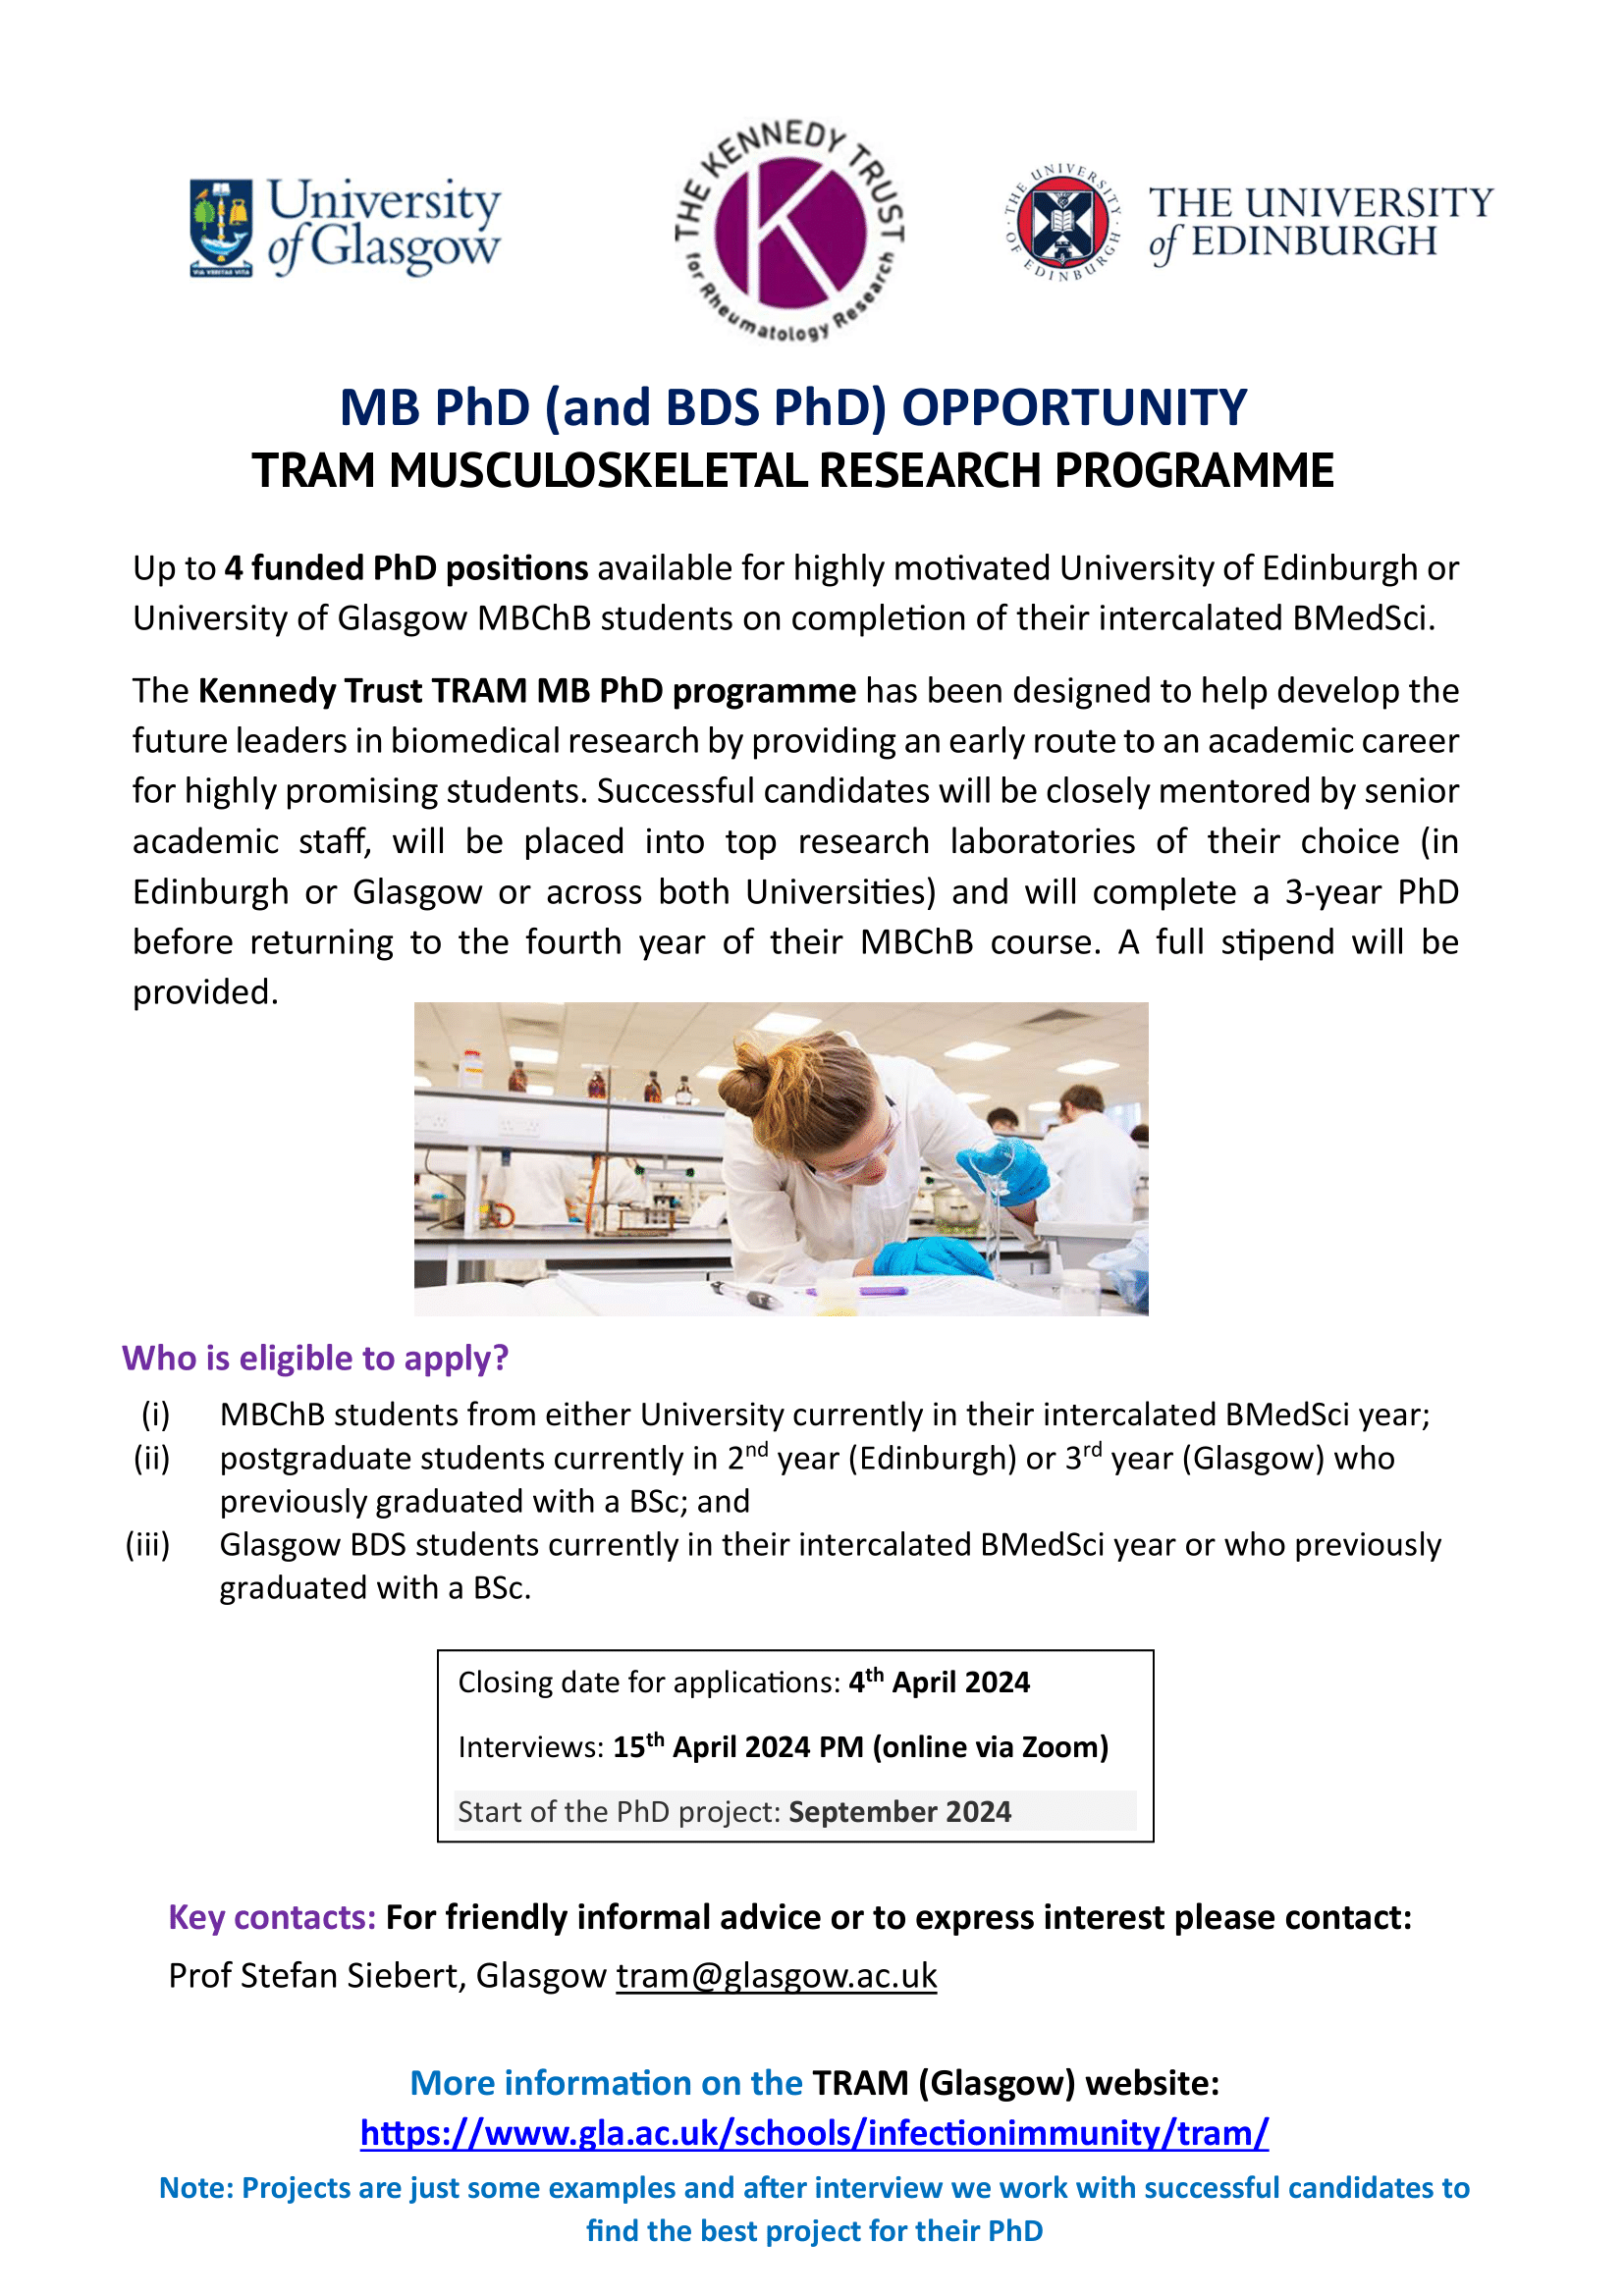 A flyer advertising the TRAM/TRACC MB PhD opportunity 2024